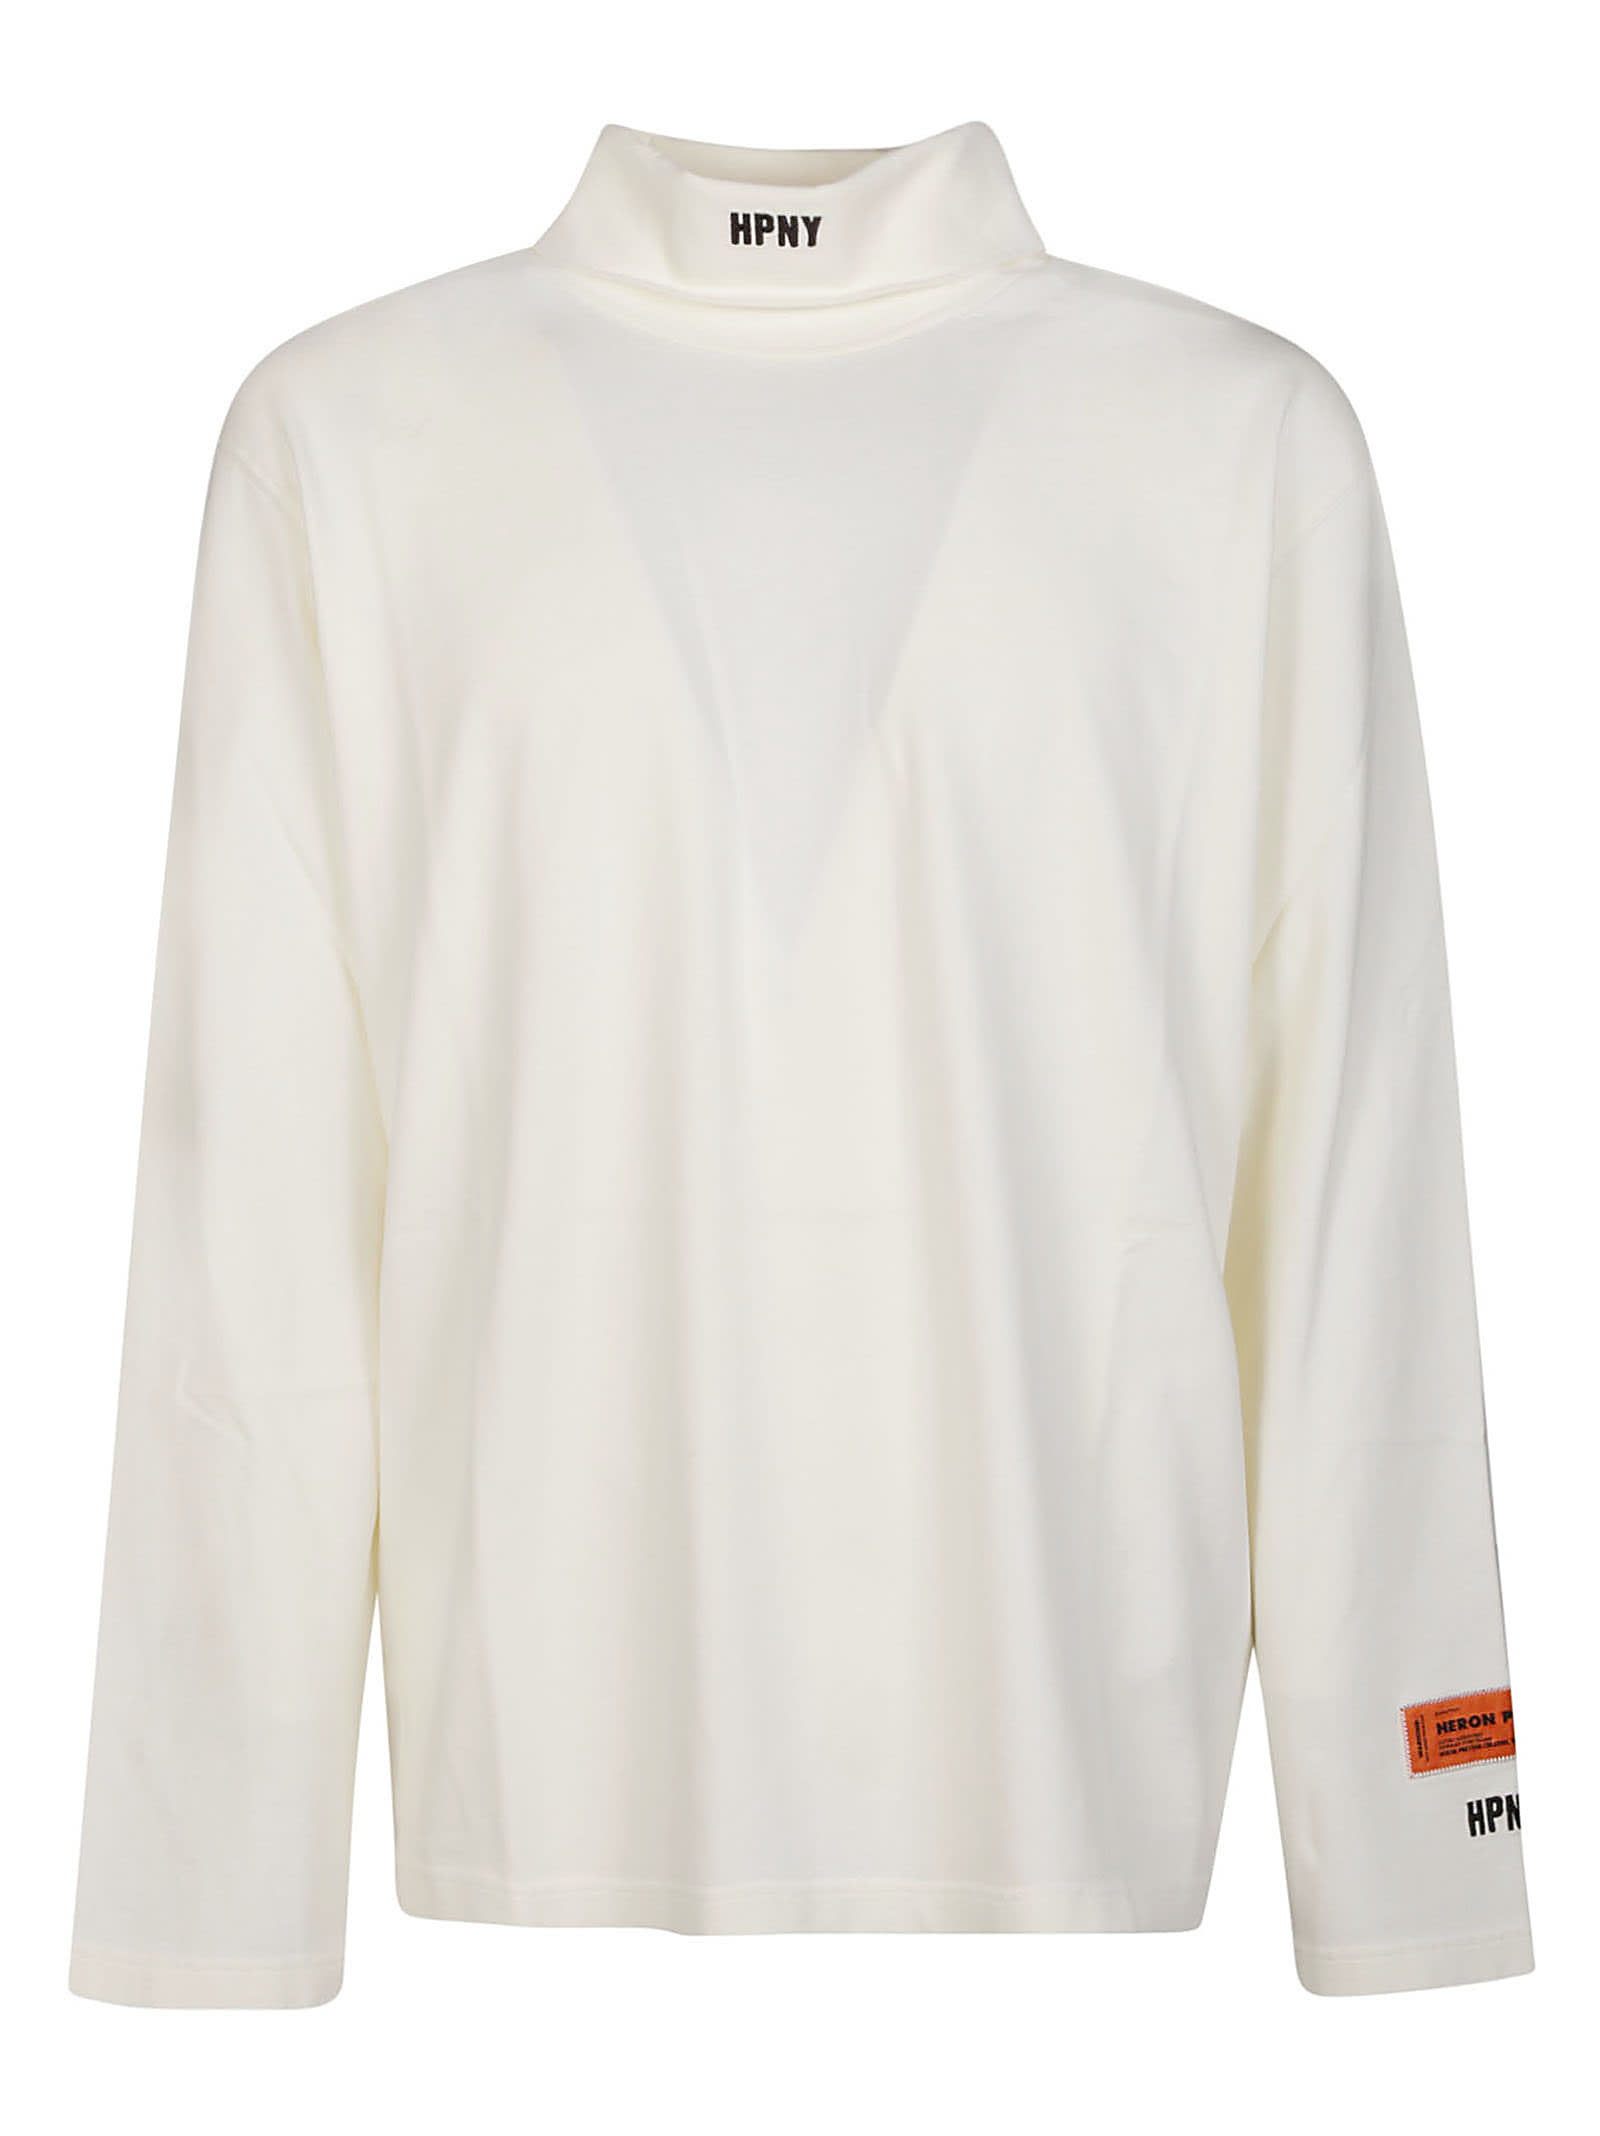 Shop Heron Preston Hpny Embroidery Roll Neck Long Sleeve T-shirt In White Black